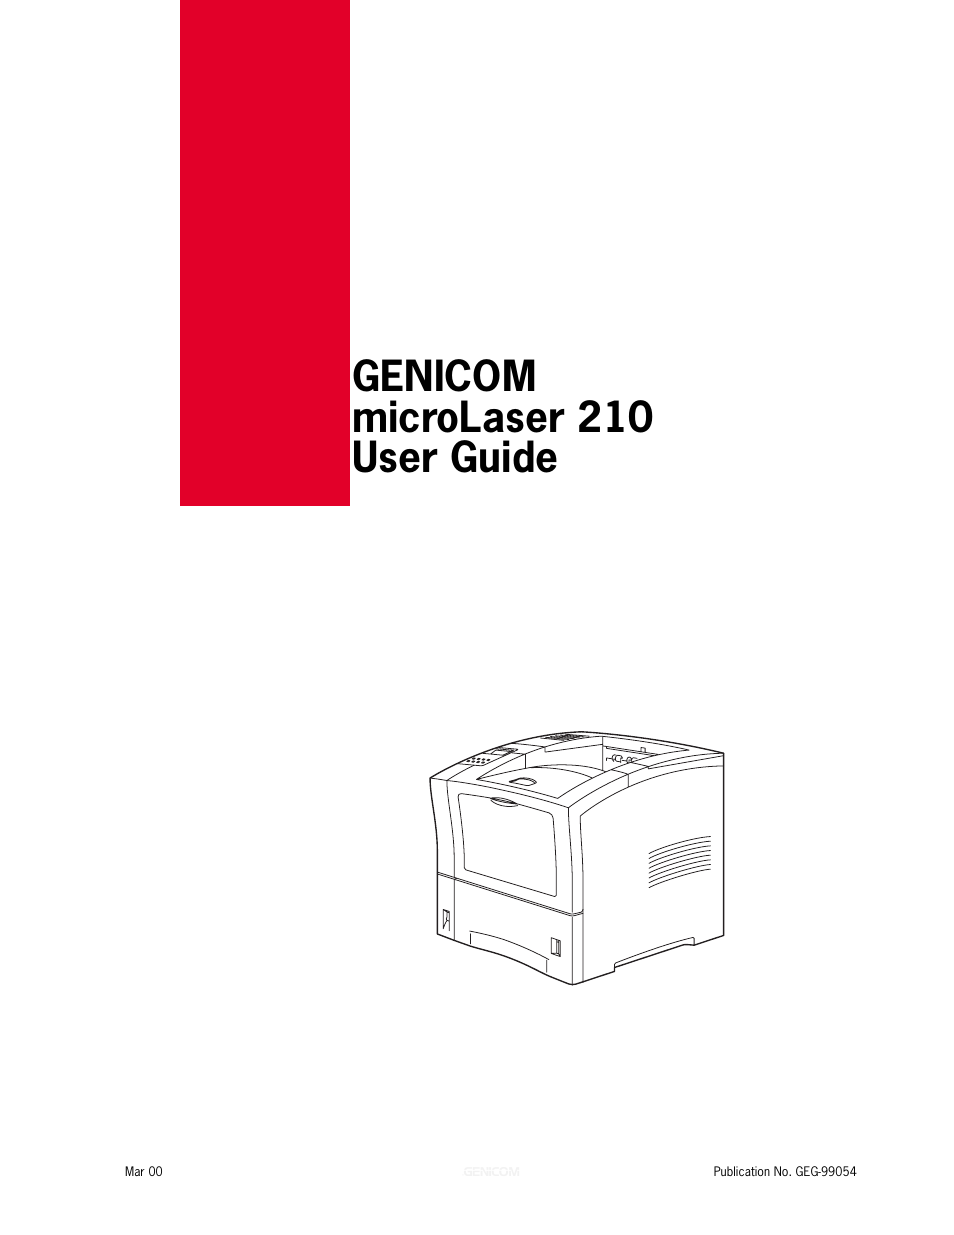 Genicom microLaser 210 User Manual | 212 pages